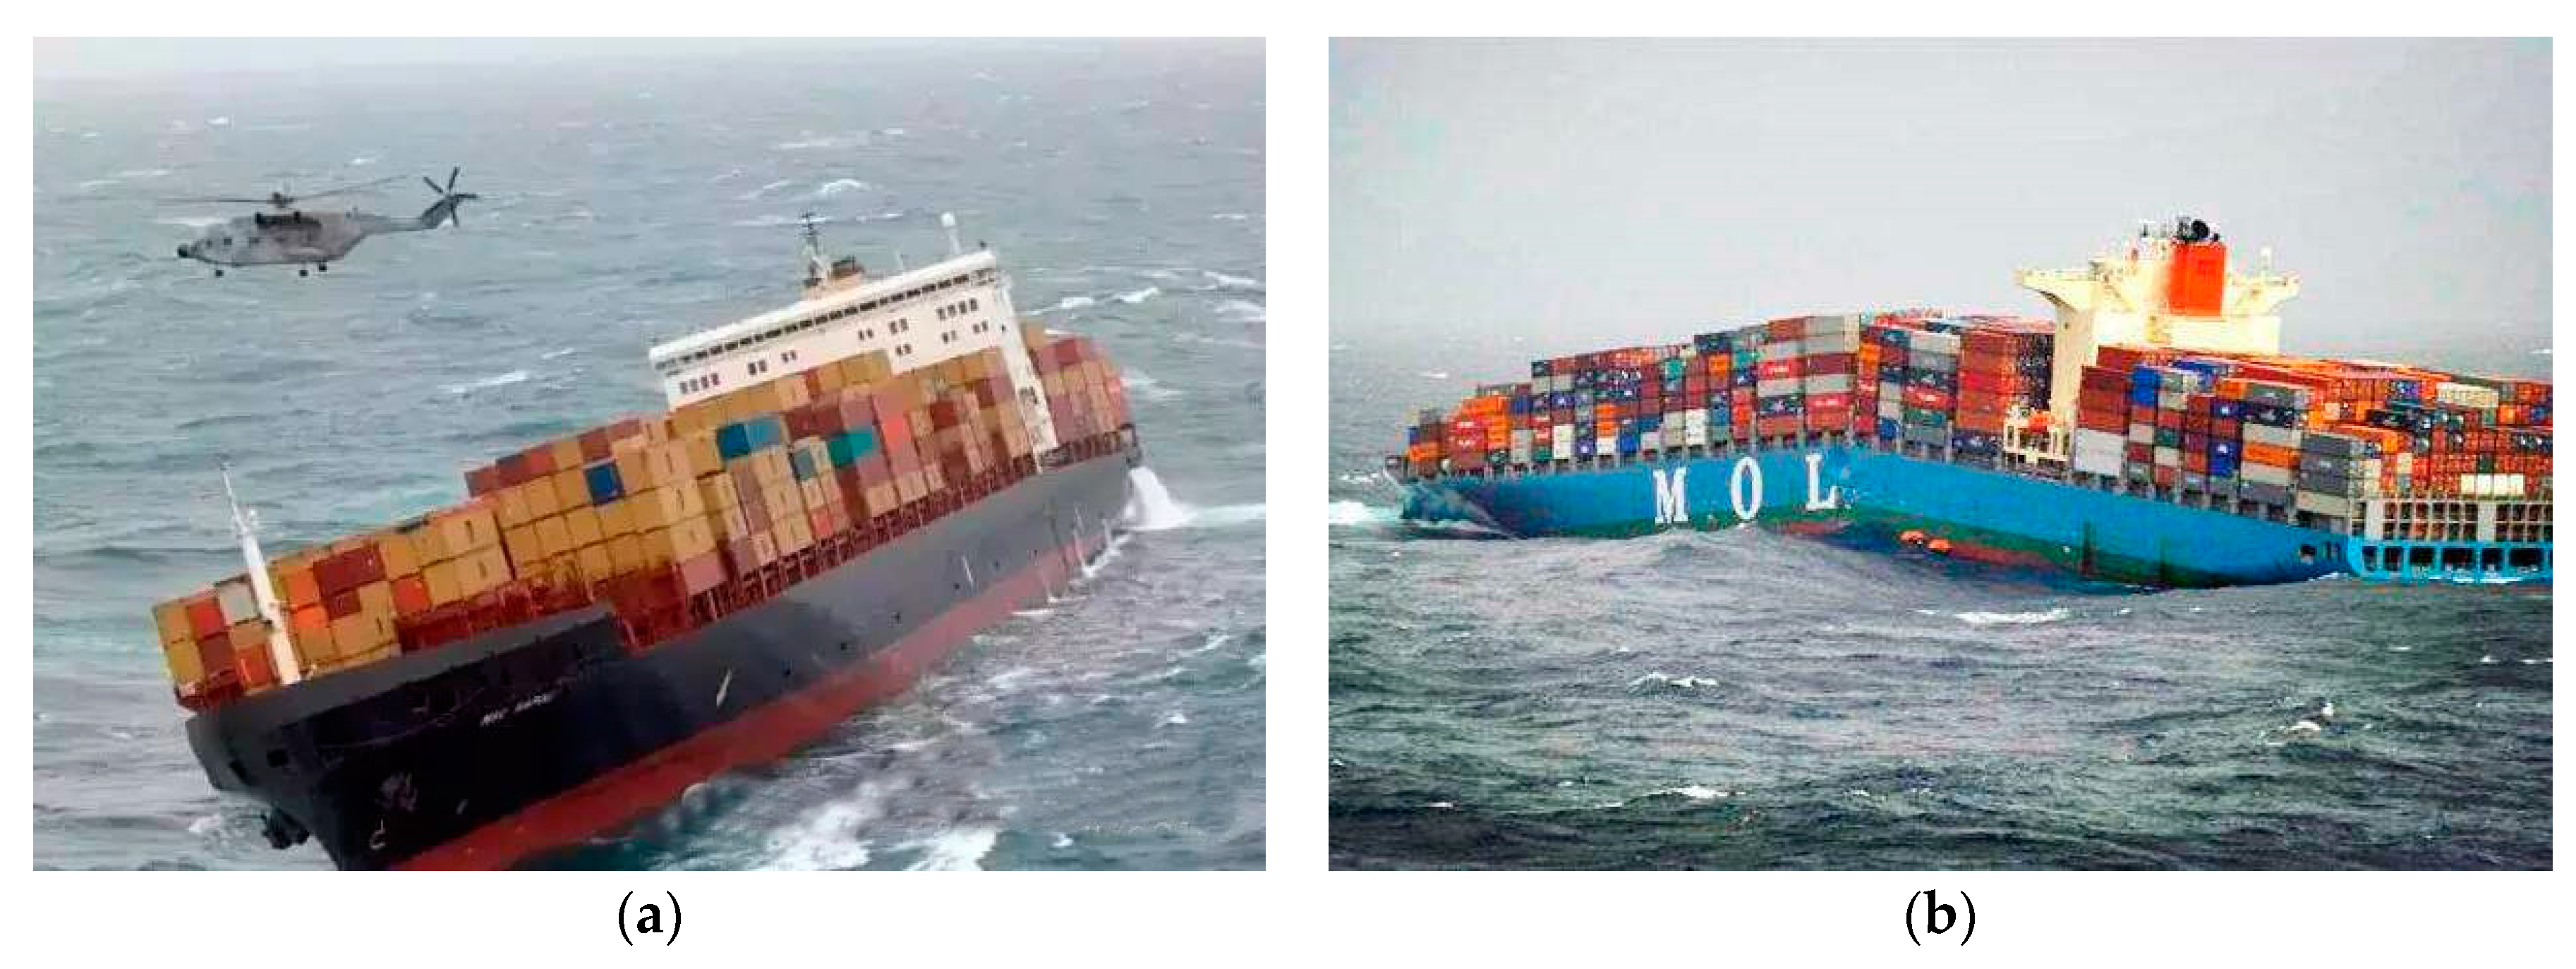 hydroelasticity of ships